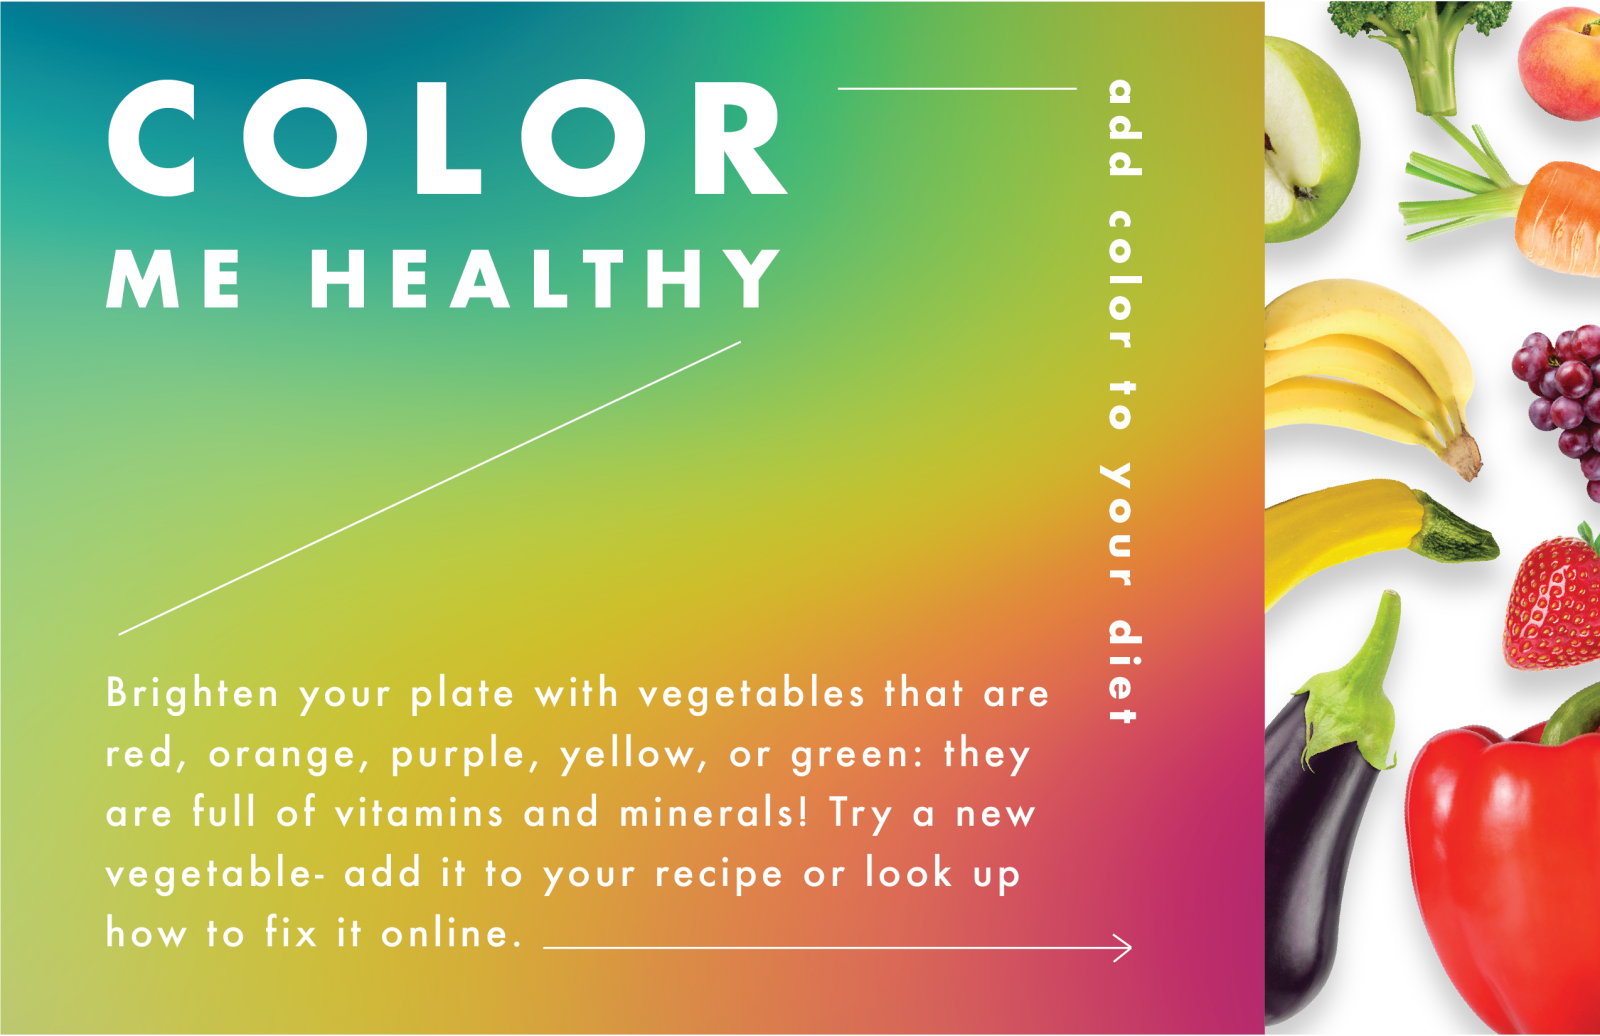 colormehealthy-03